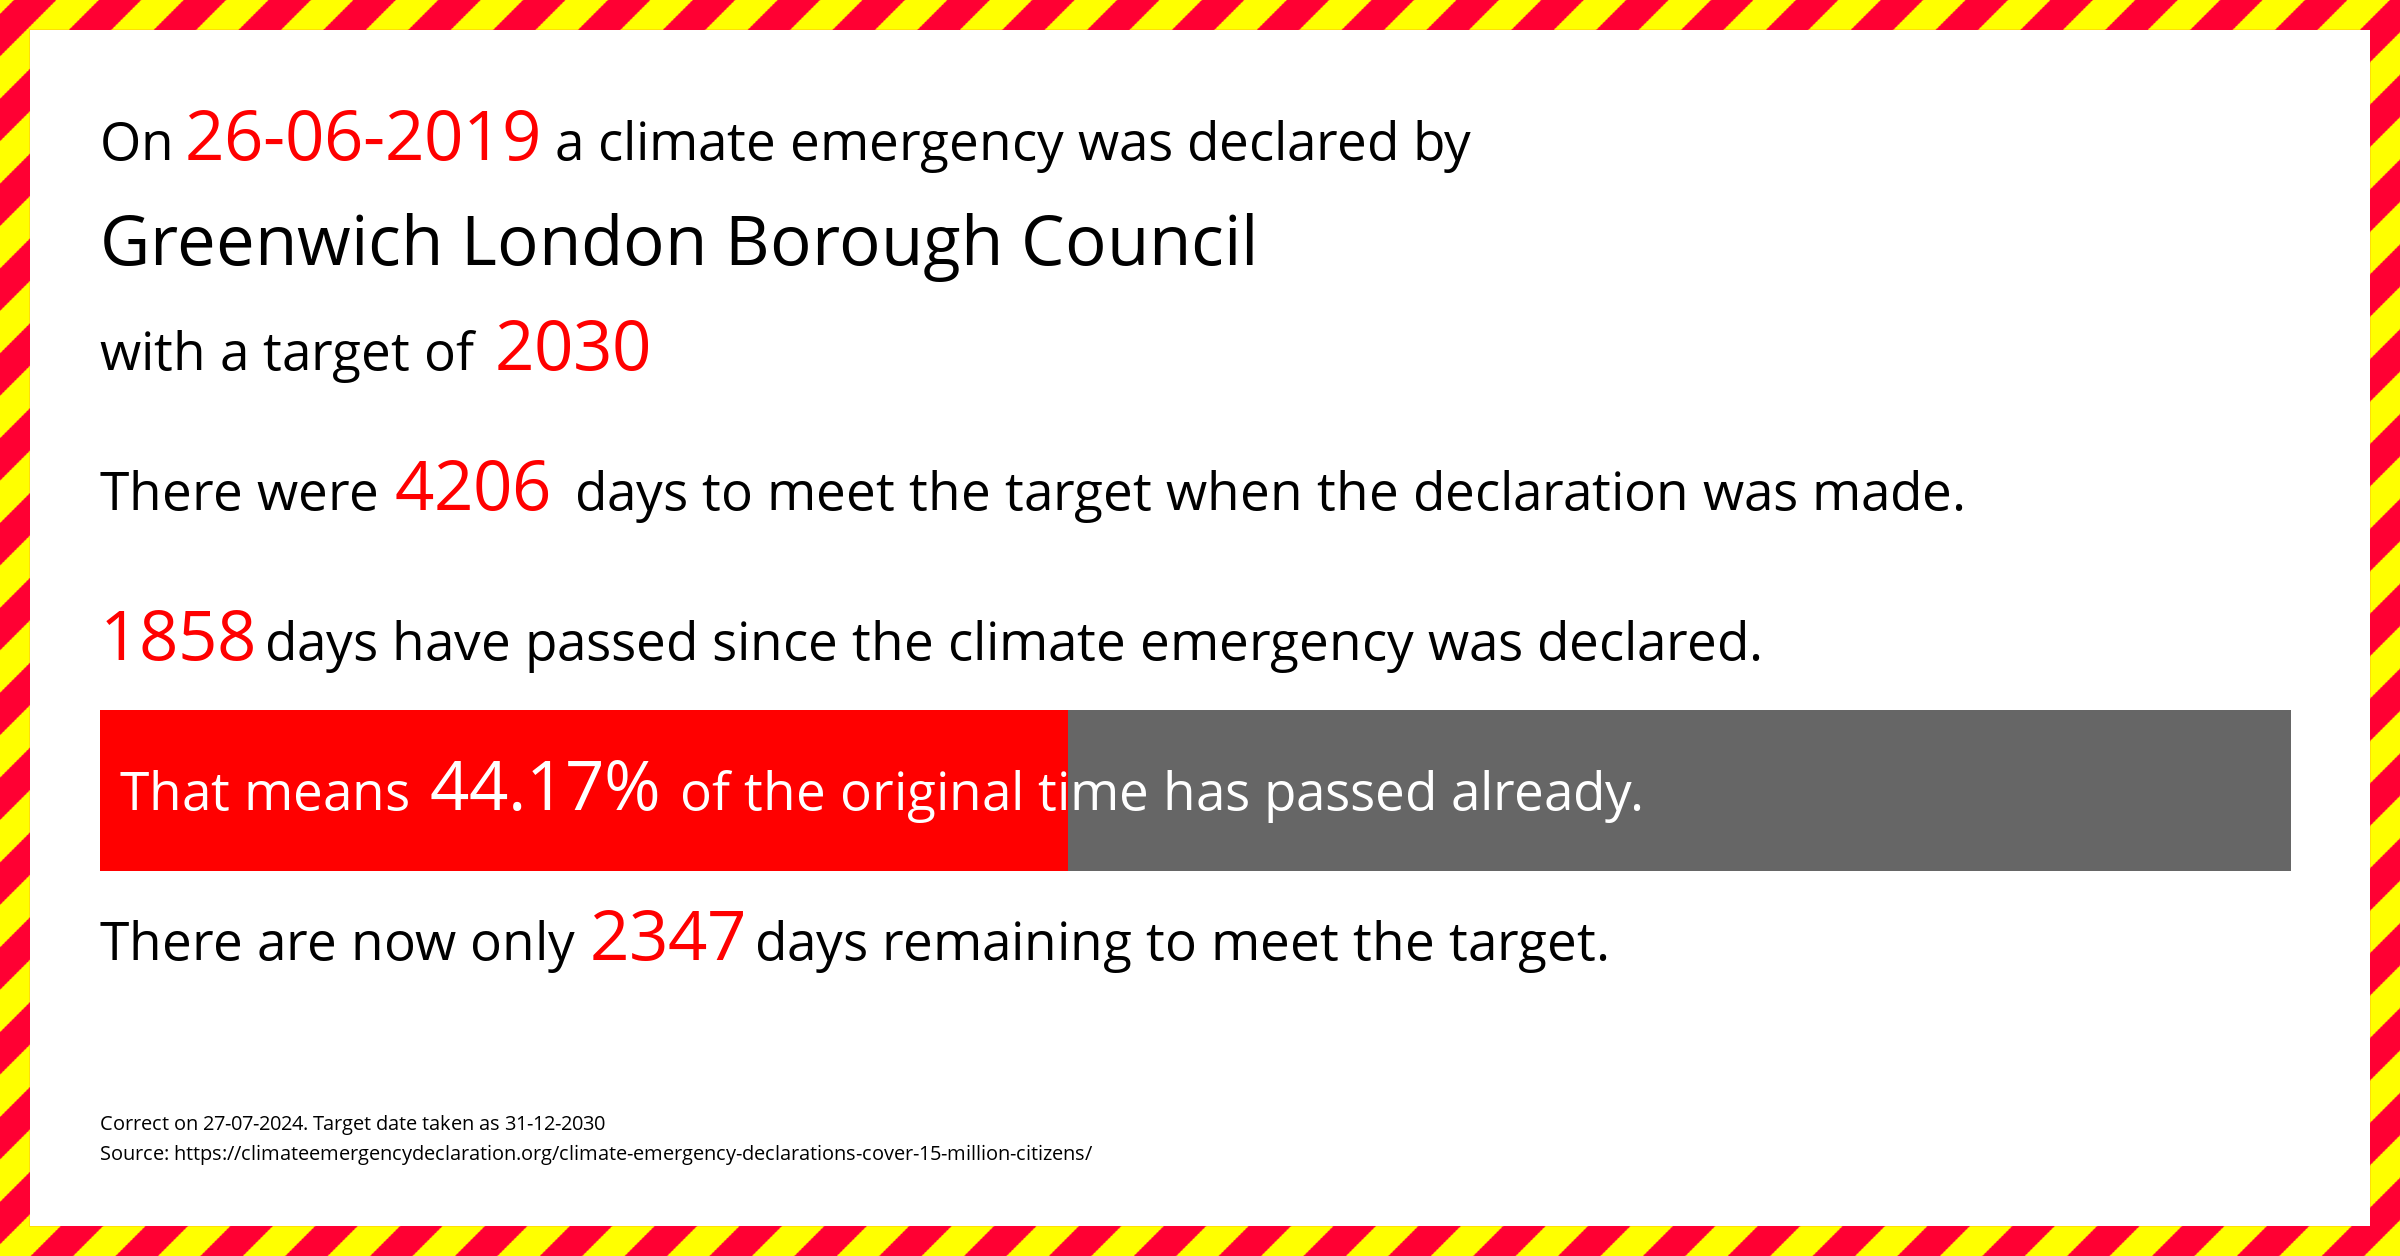 Greenwich London Borough Council declared a Climate emergency on Wednesday 26th June 2019, with a target of 2030.